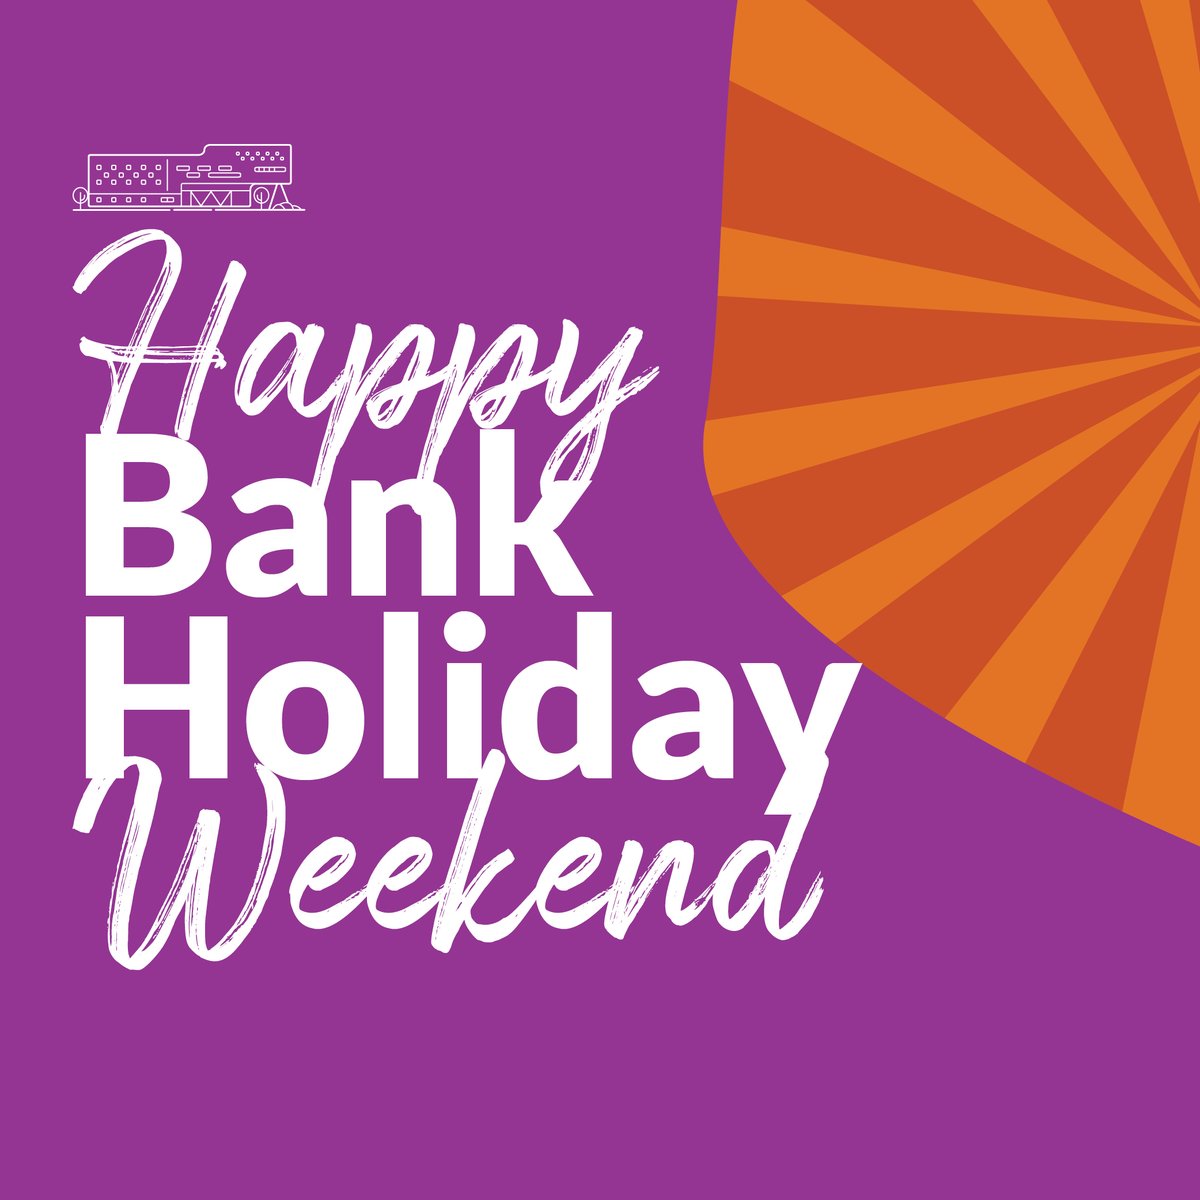 Monday 6 May is a Bank Holiday - please remember that College is therefore closed to both staff and students. We hope that everyone enjoys the long weekend! Lessons will commence as normal on Tuesday 7 May #LongWeekend